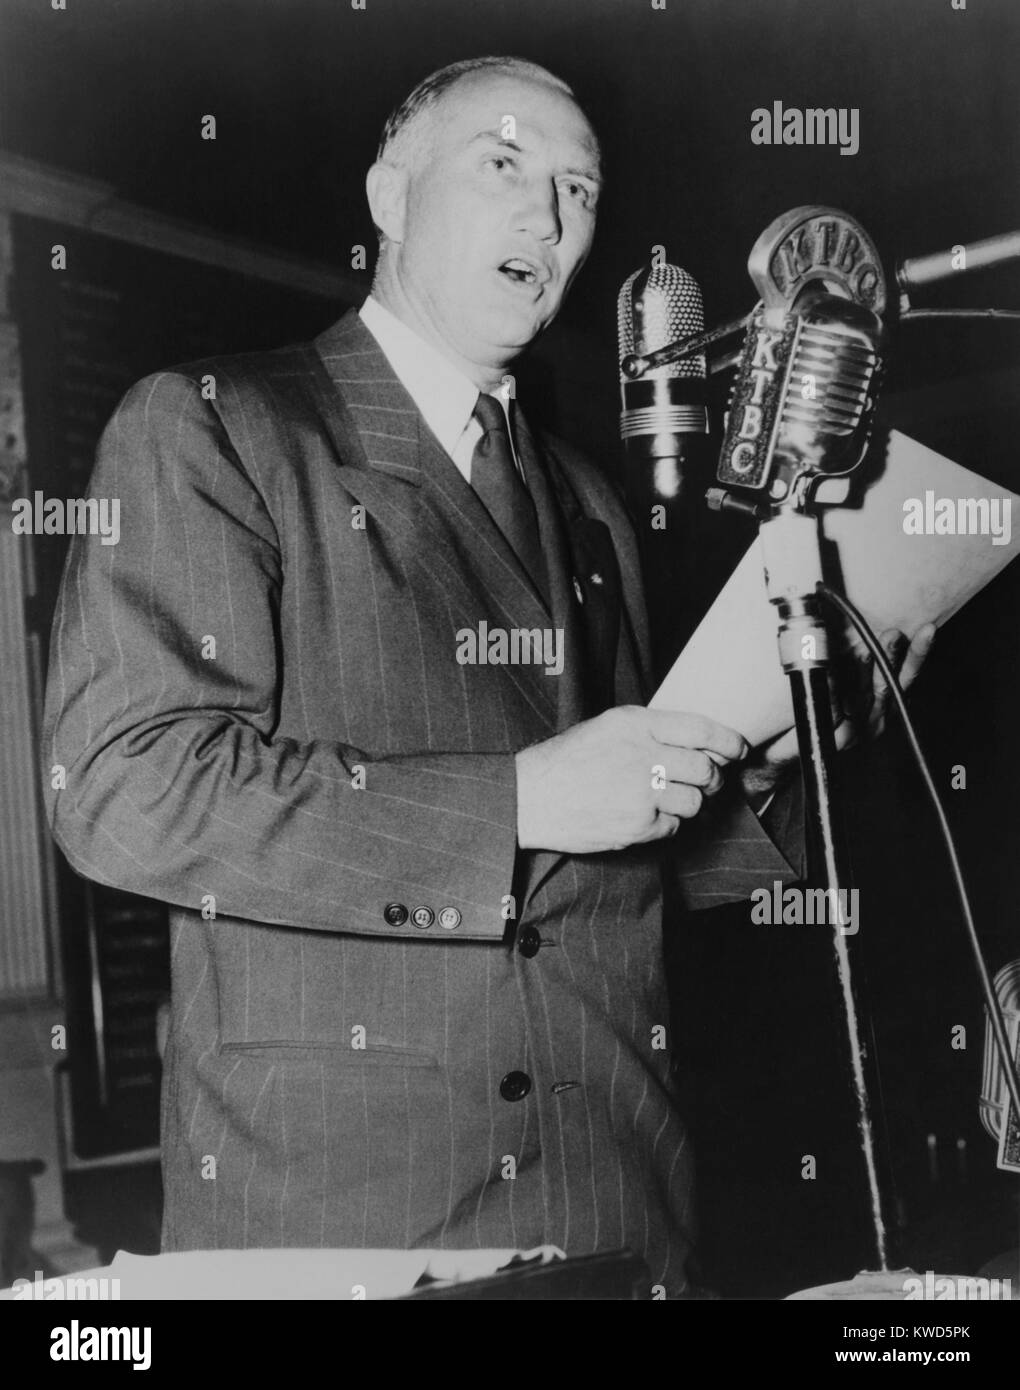 Governor Strom Thurmond, States Rights Presidential candidate, campaigning in Austin, Texas. Oct. 29, 1948. He received 38 electoral votes from 4 traditionally Democratic southern states. (BSLOC 2014 13 50) Stock Photo